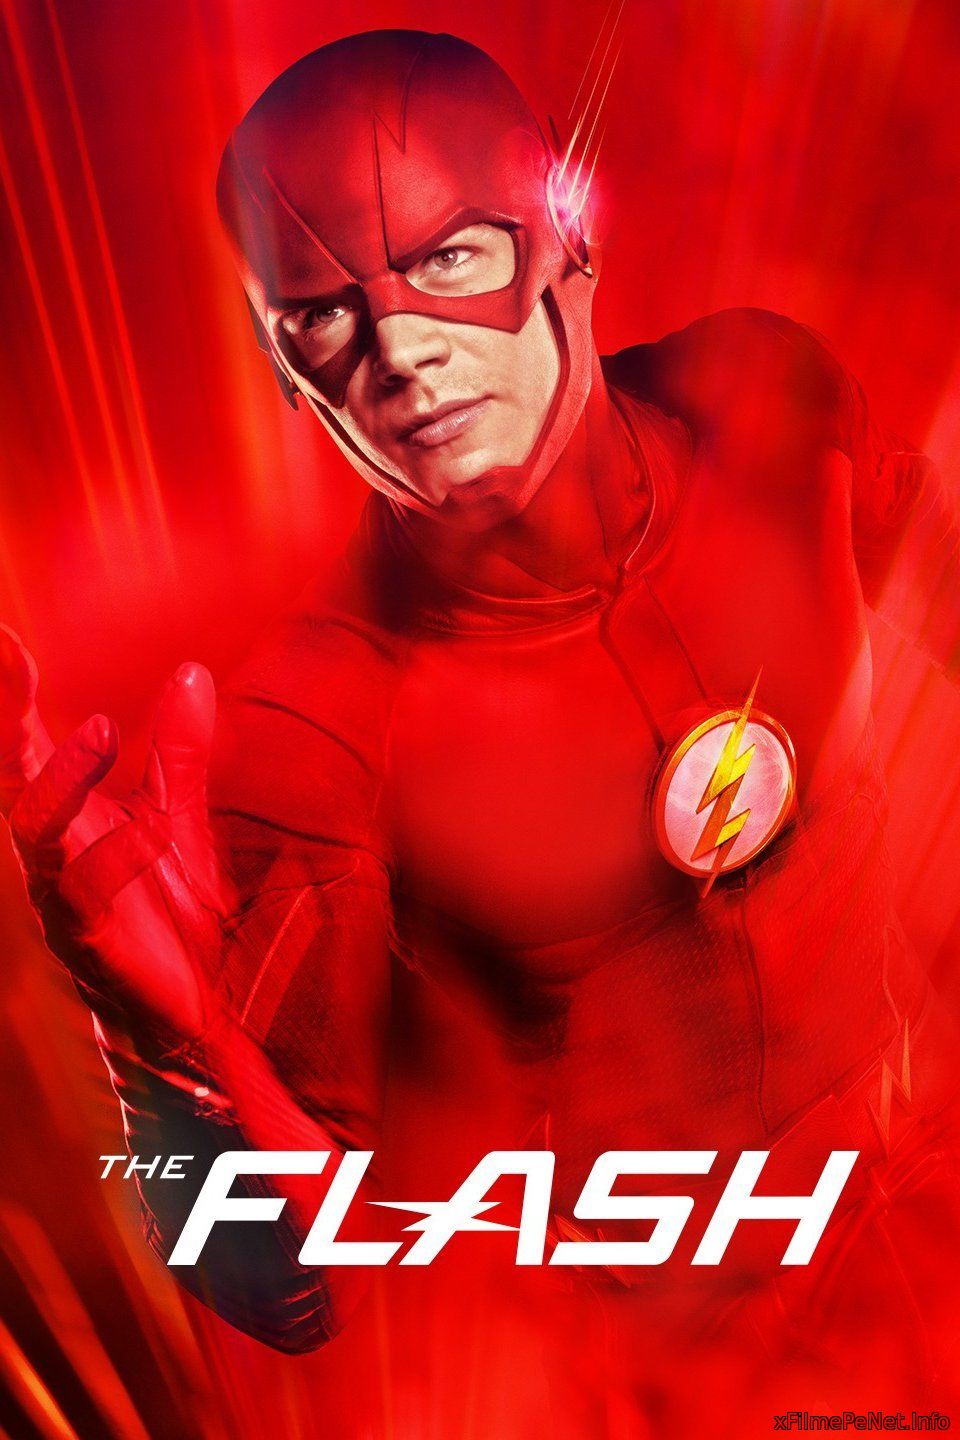 The Flash Sezon 02 Episod 23 - The Race of His Life